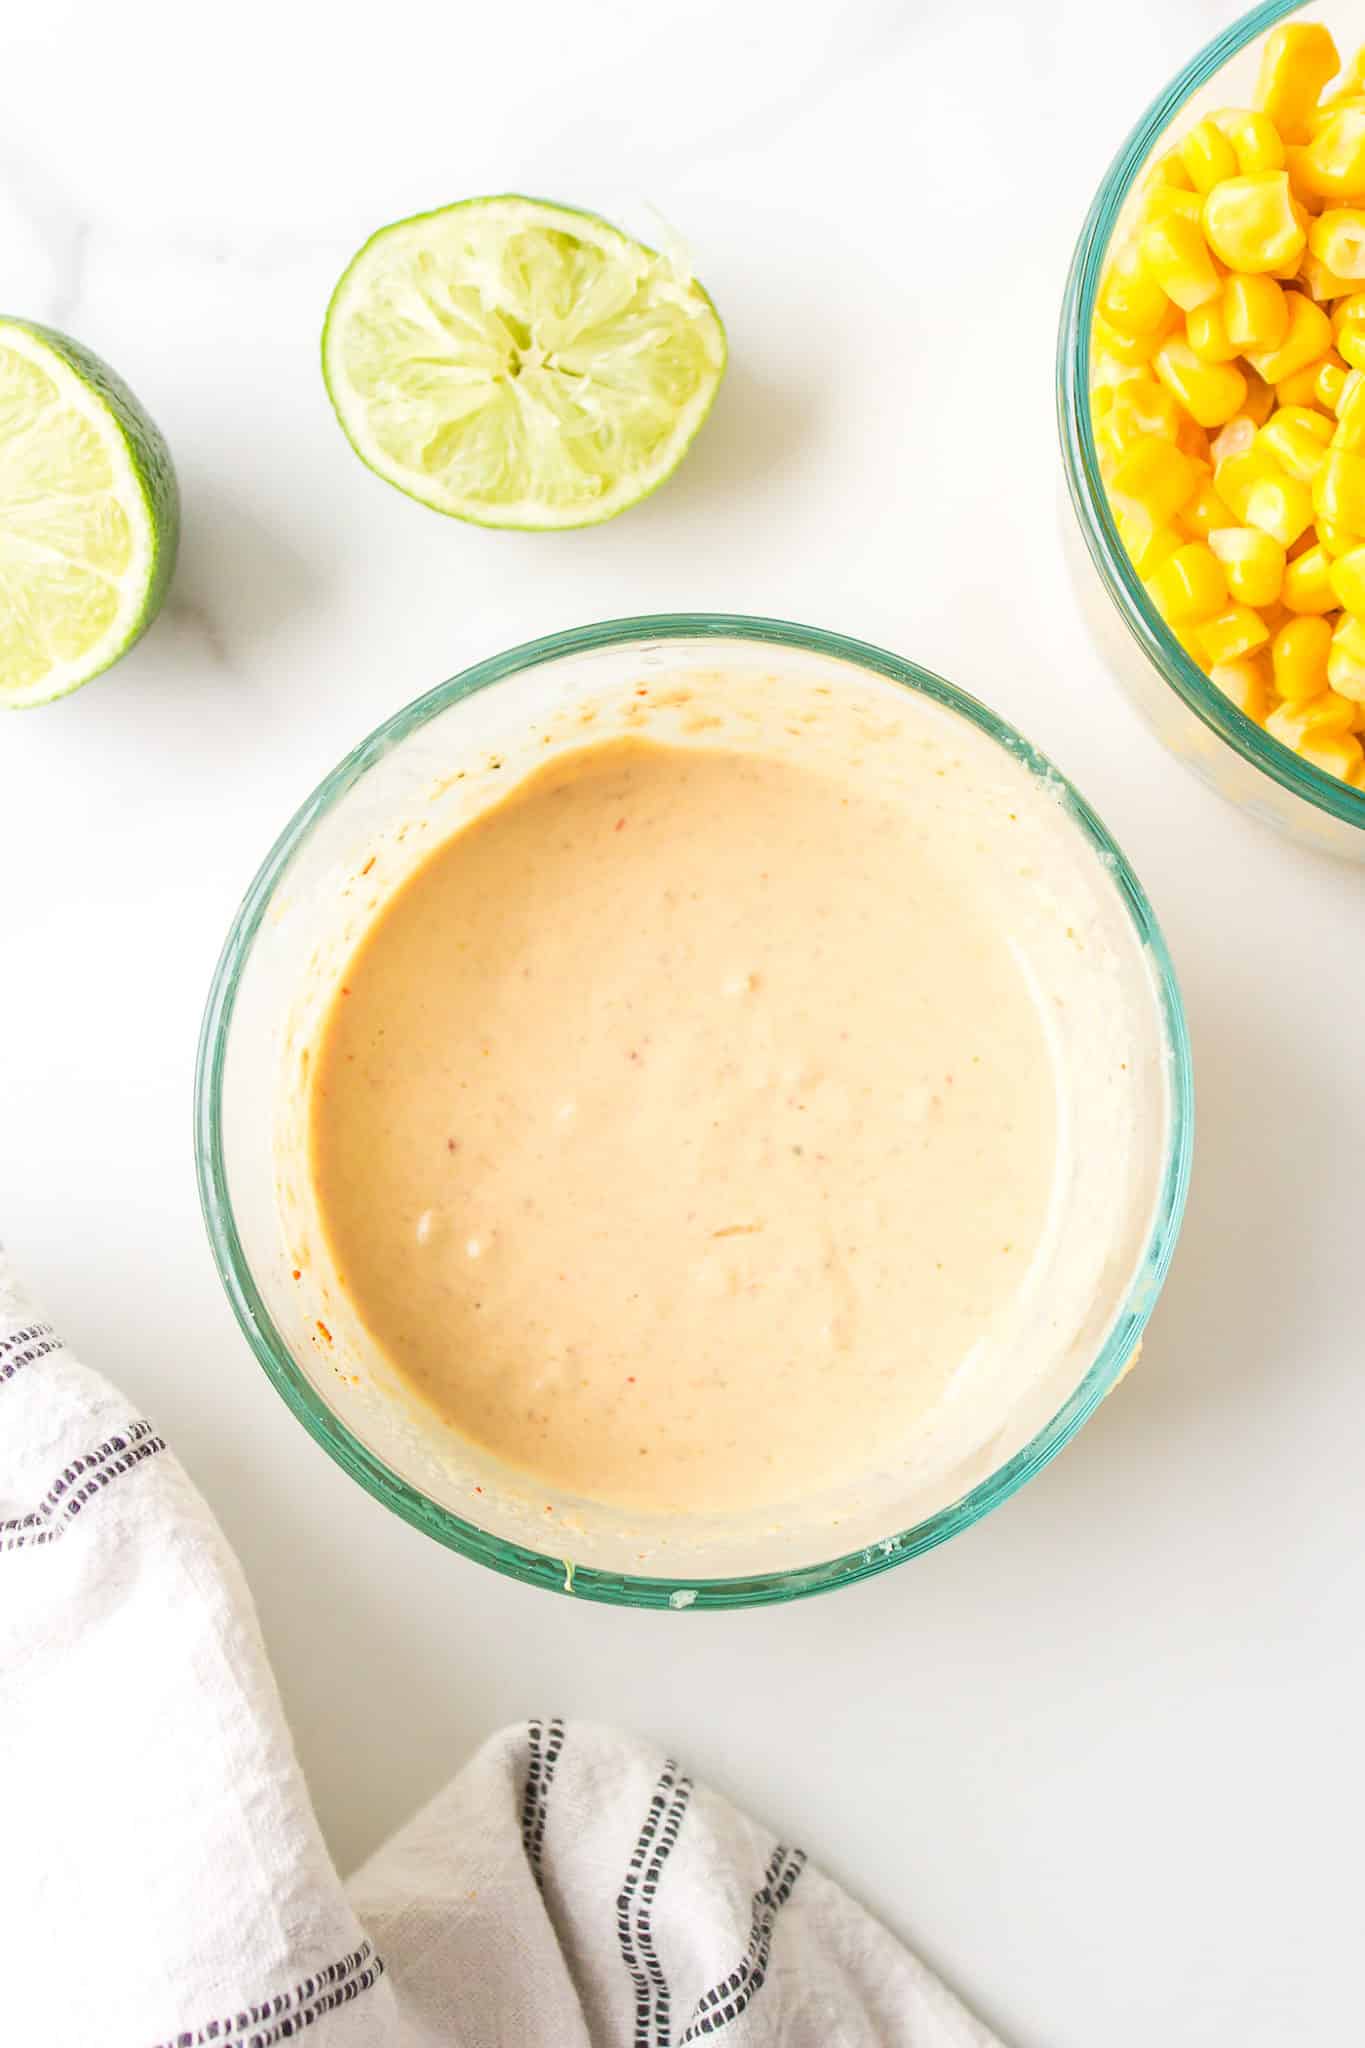 Spicy tahini sauce in a small glass bowl next to a bowl of corn.